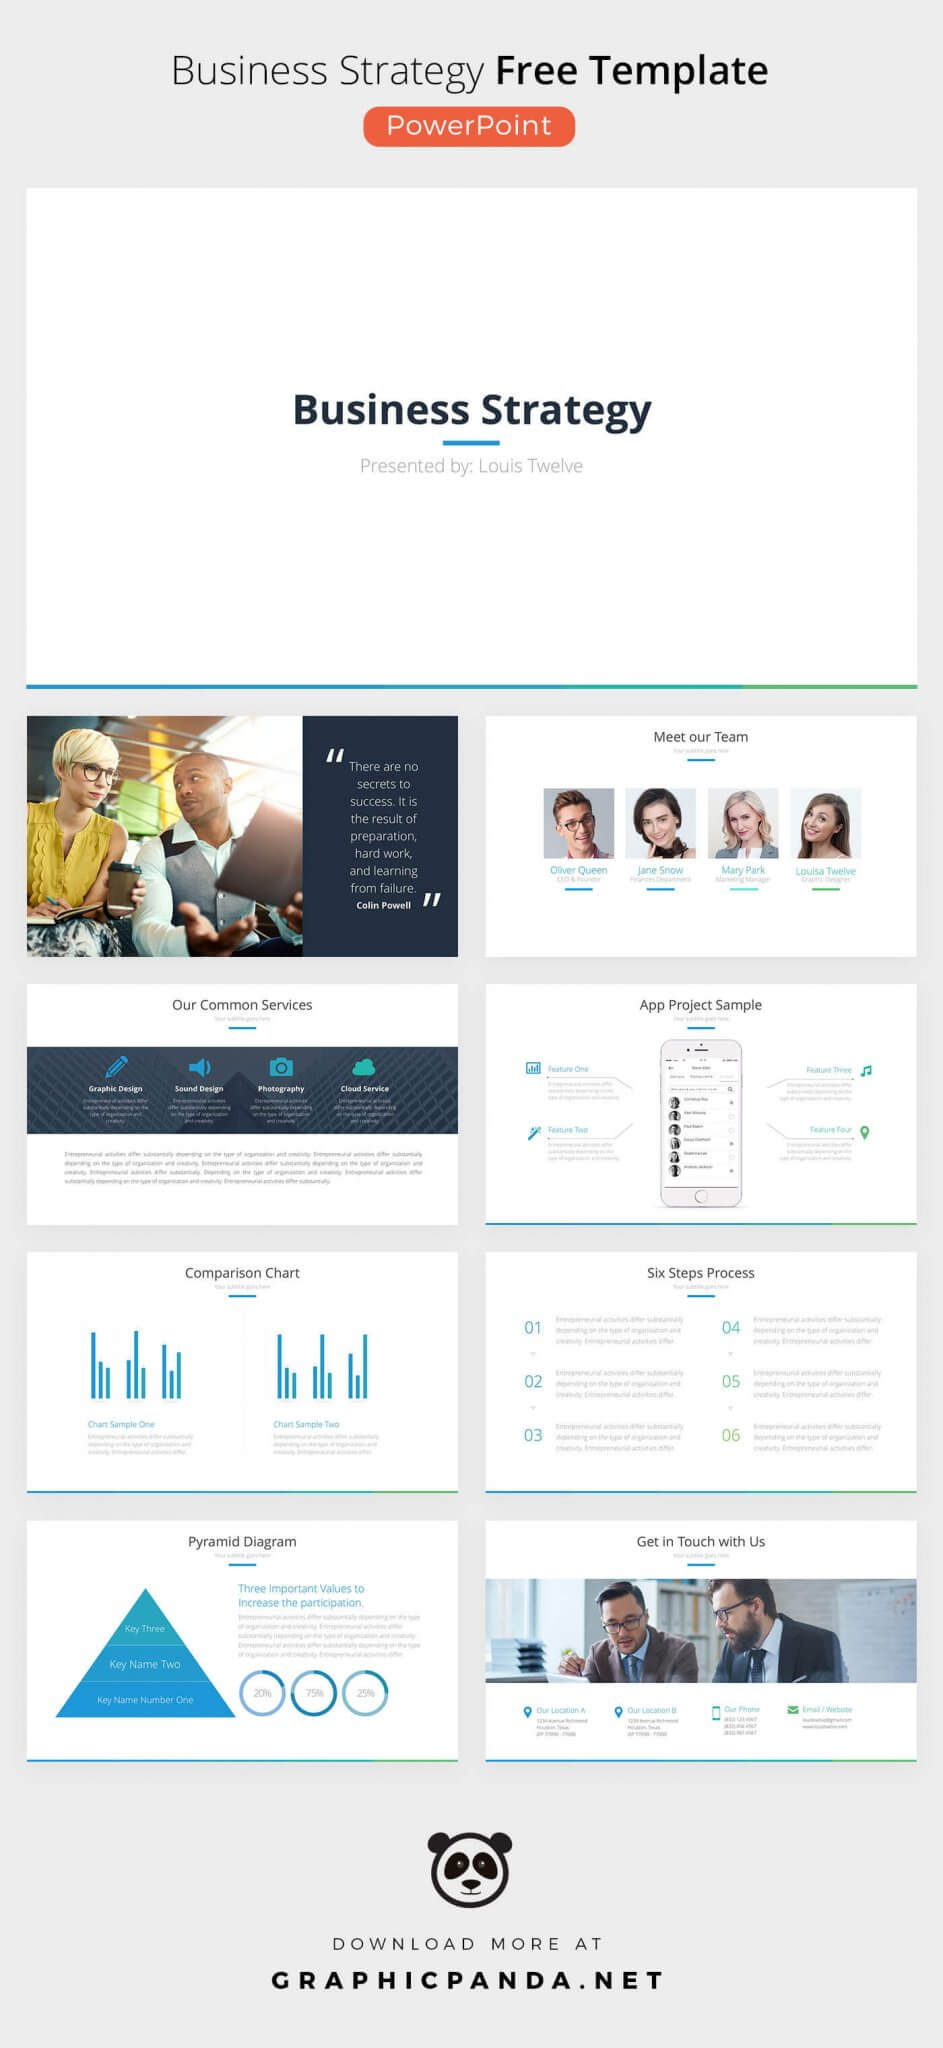 Business Strategy Free Powerpoint Template Ppt / Pptx Inside Biography Powerpoint Template